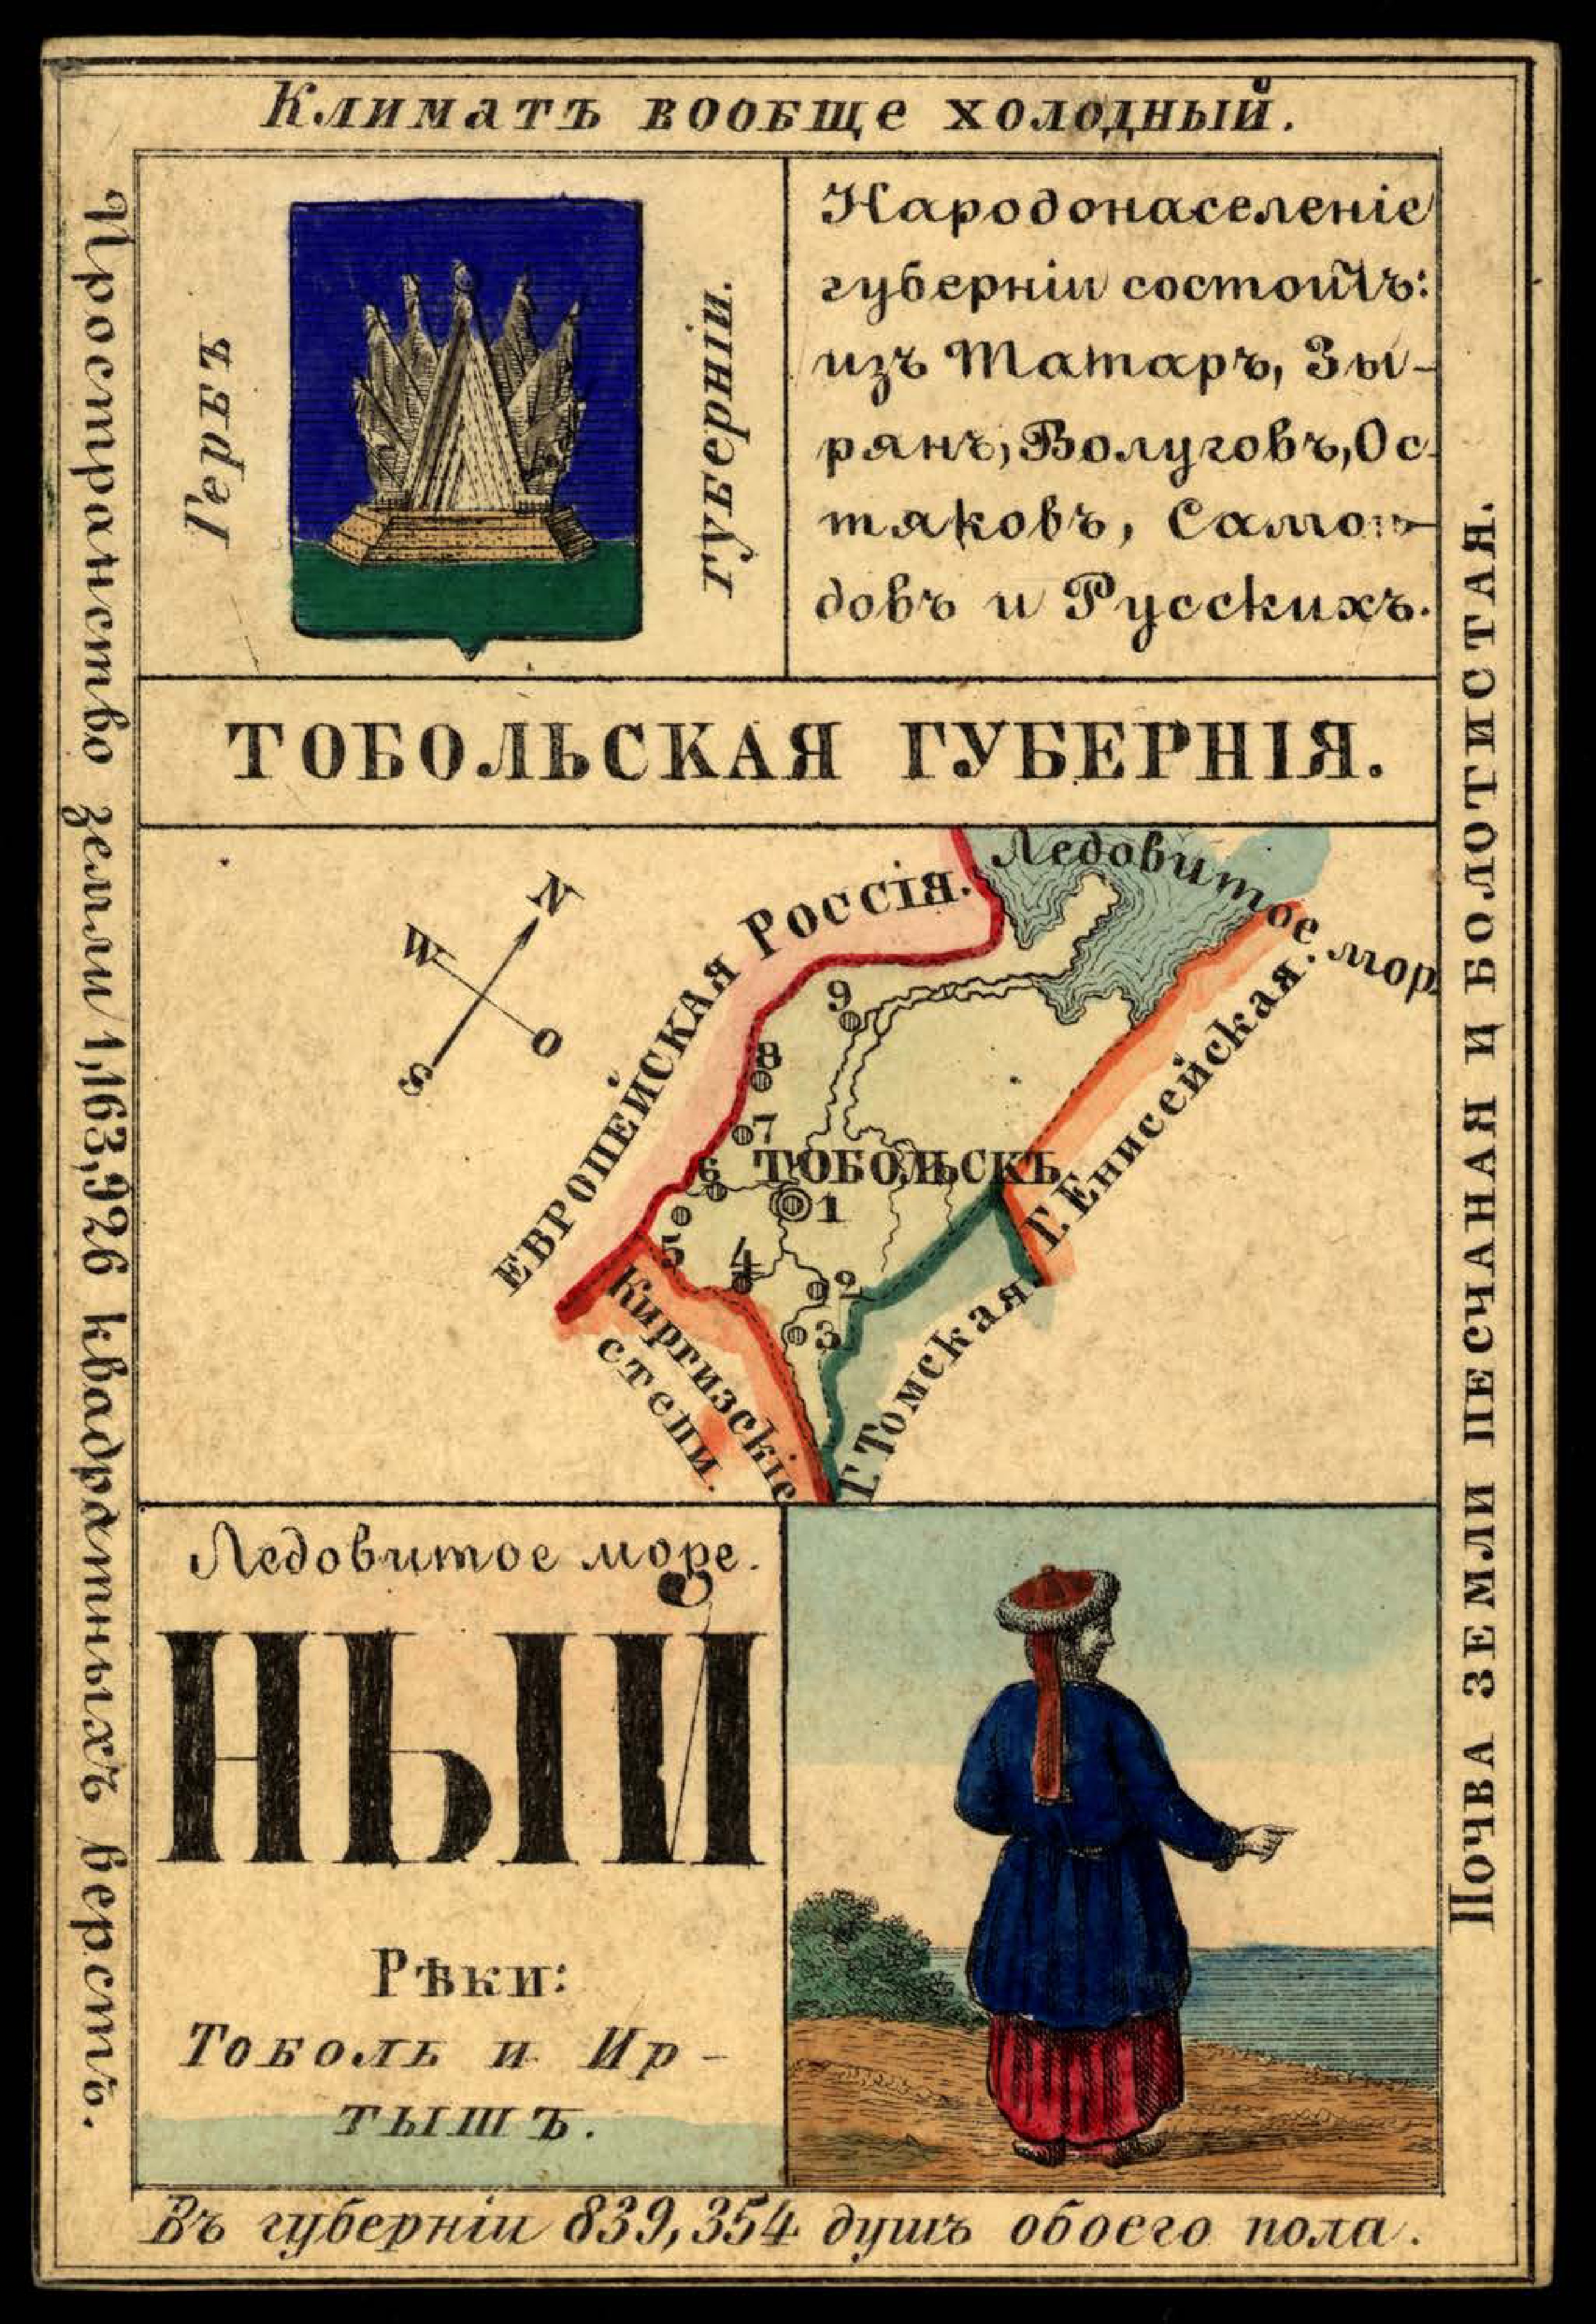 1856. Card from set of geographical cards of the Russian Empire 136